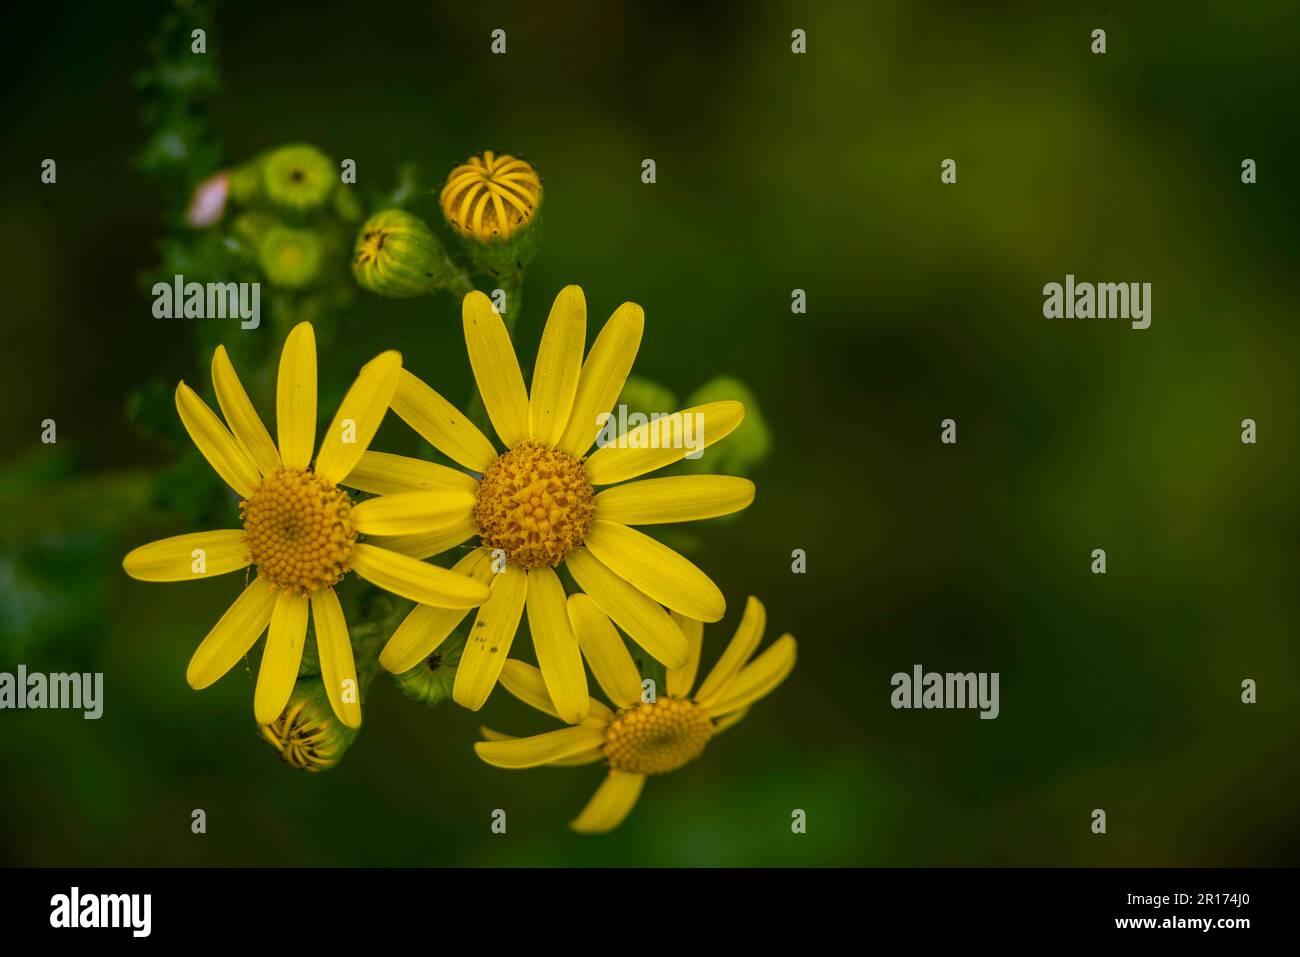 Senecio squalidus Yellow flowers of Oxford ragwort, panoramic view, Jacobaea vulgaris. Floral header  daisy family Asteraceae blooming copy space text Stock Photo